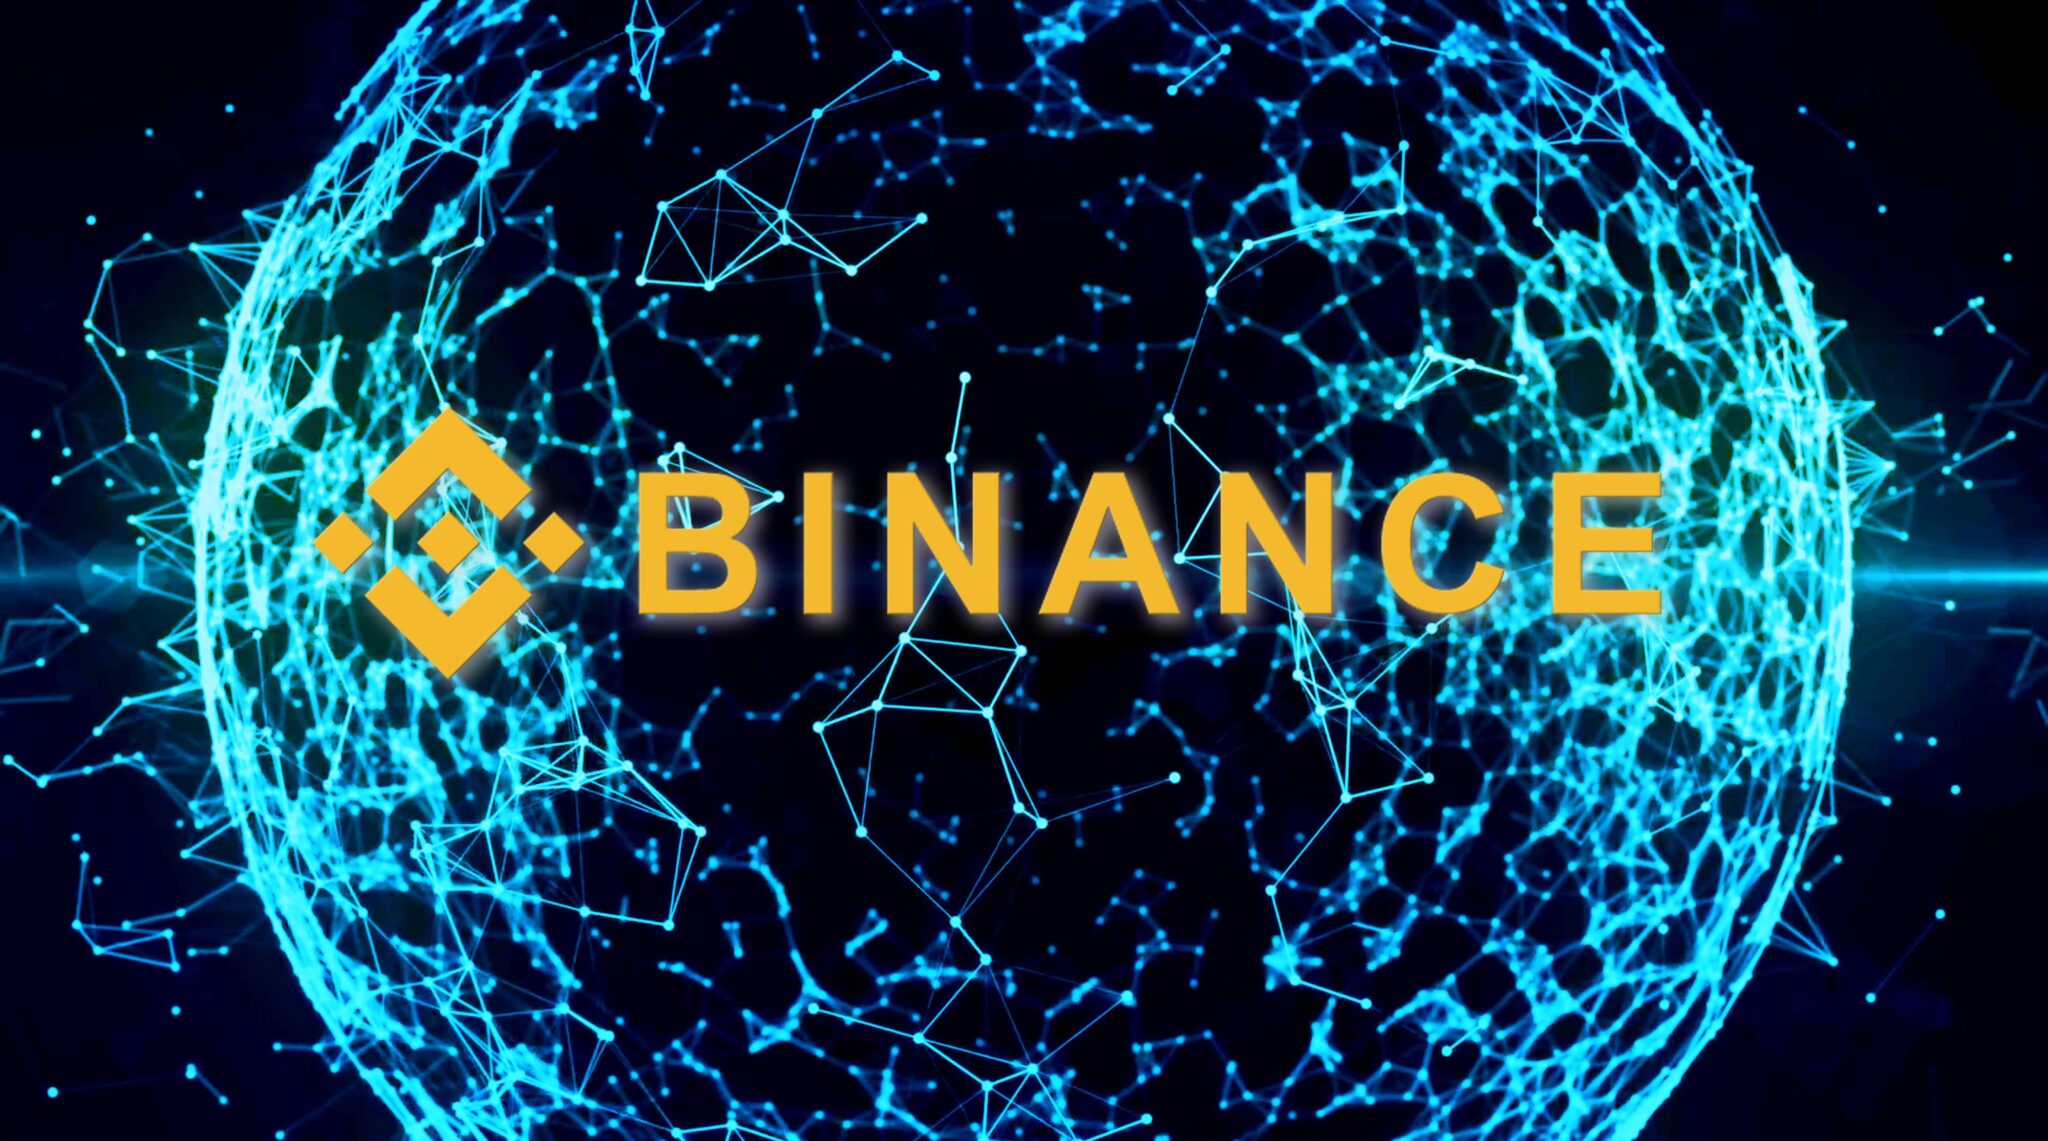 Binance Secures Temporary License To Operate In Kazakhstan